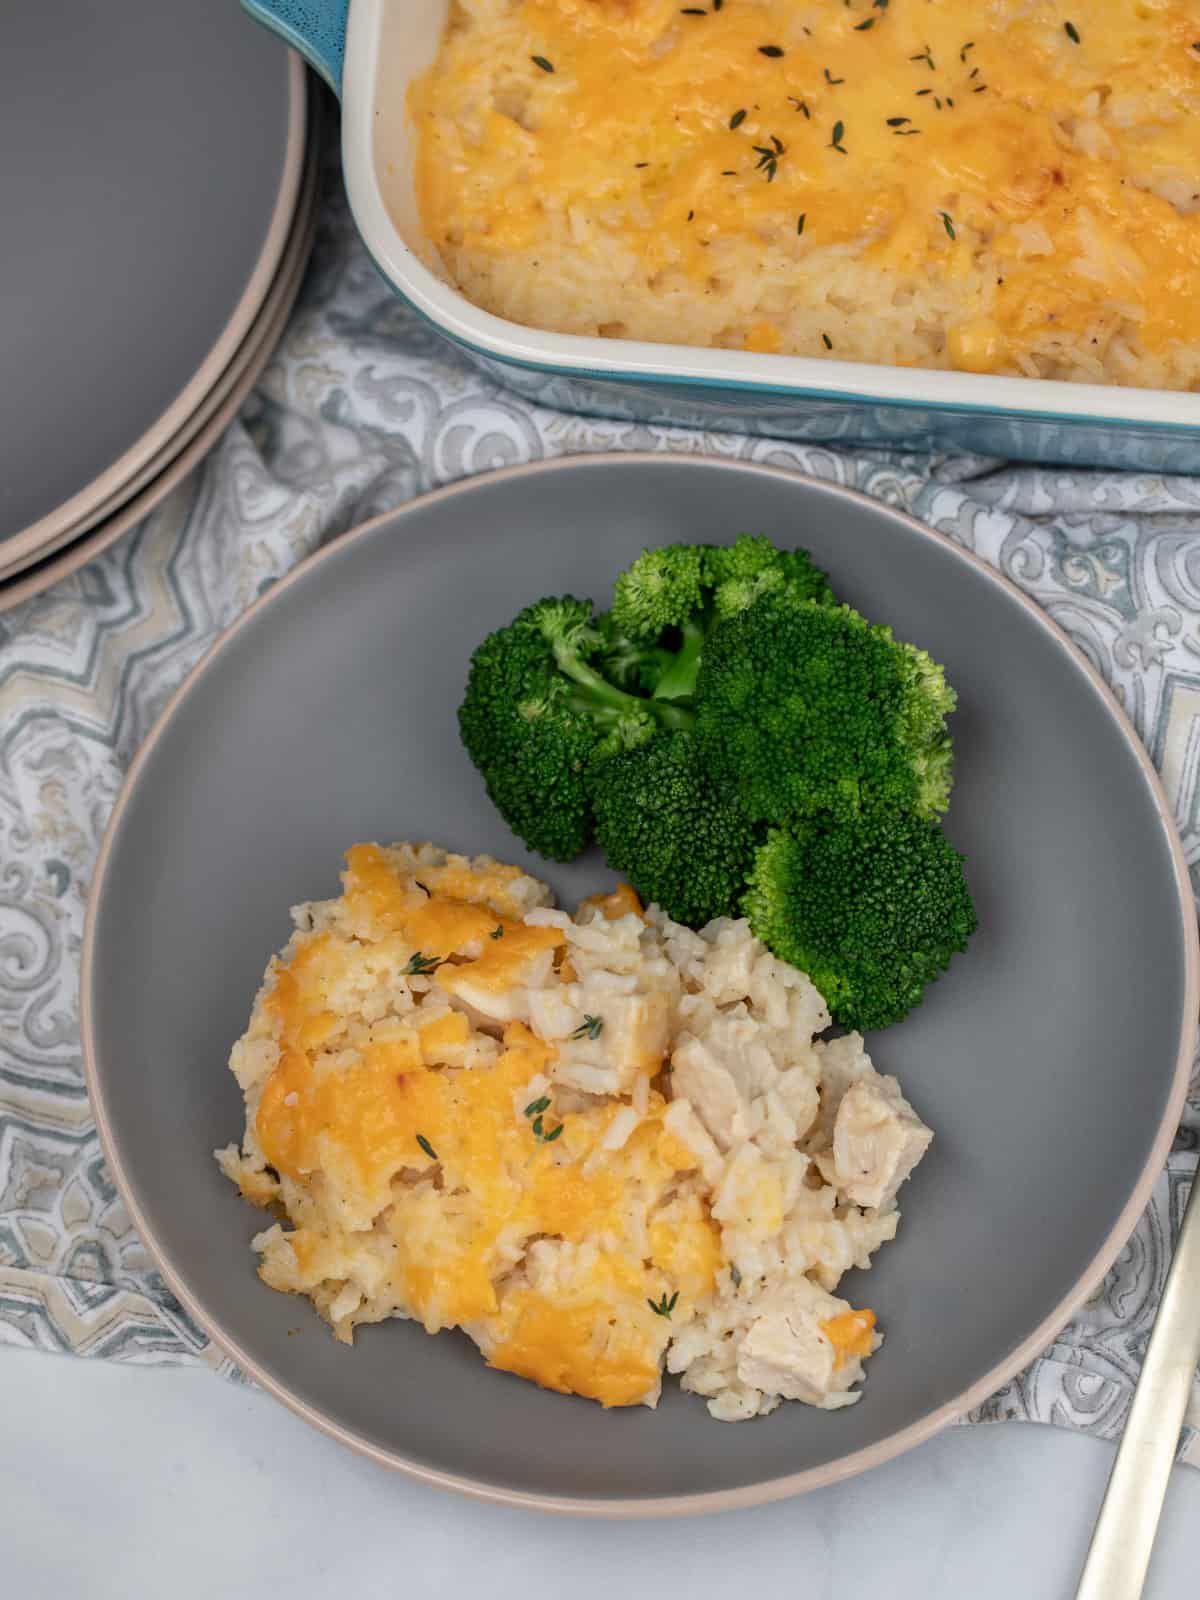 Chicken and Rice Casserole dished out on gray plate with steamed broccoli.